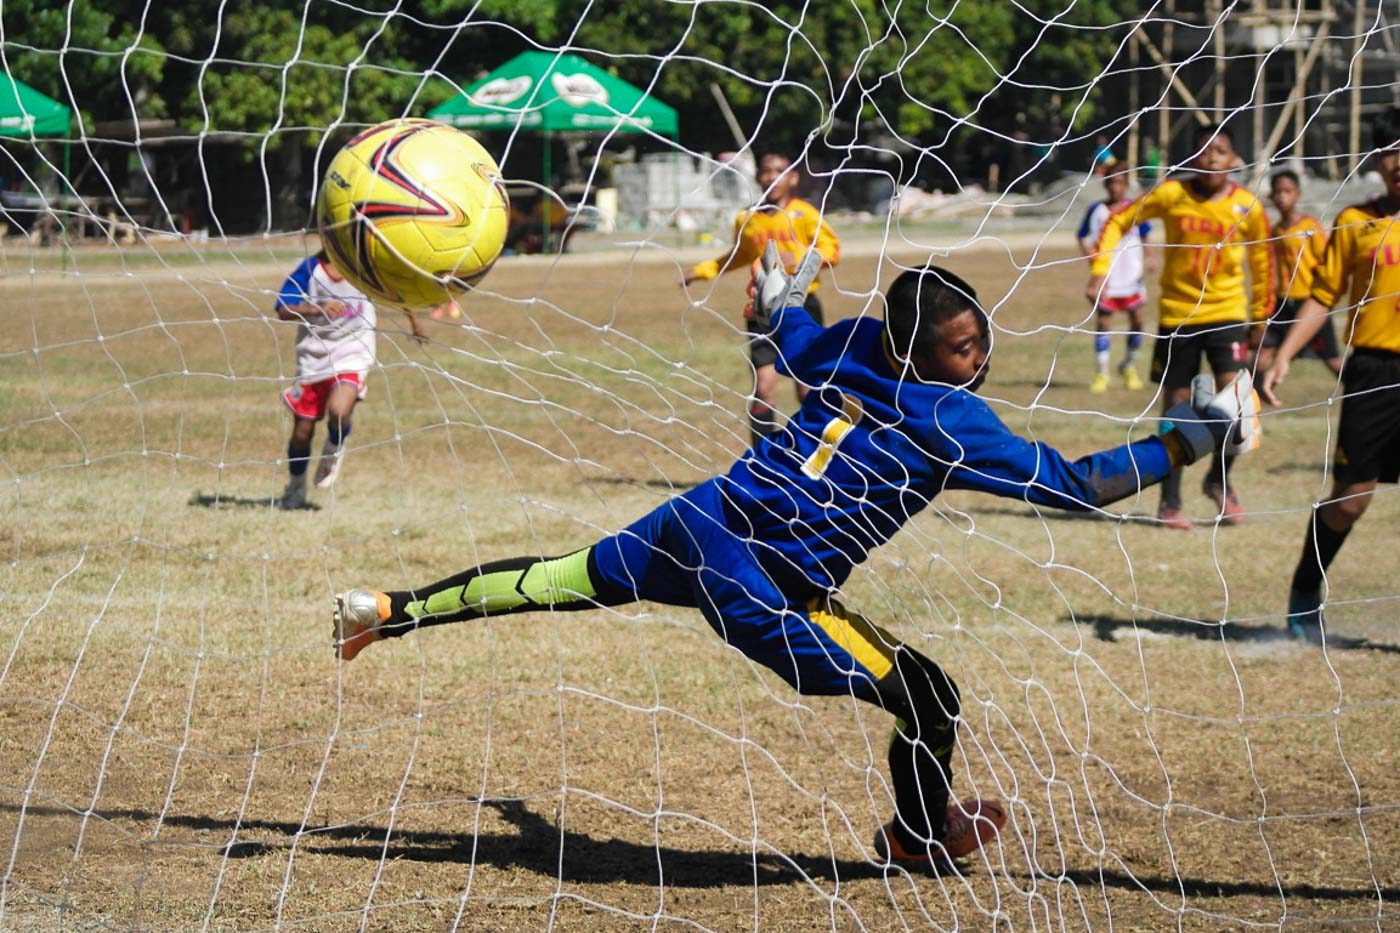 MISSING THE MARK. A Central Luzon goalkeeper fails to block Bicol Region's offense. Photo by Clarisse Cabinta/Rappler  